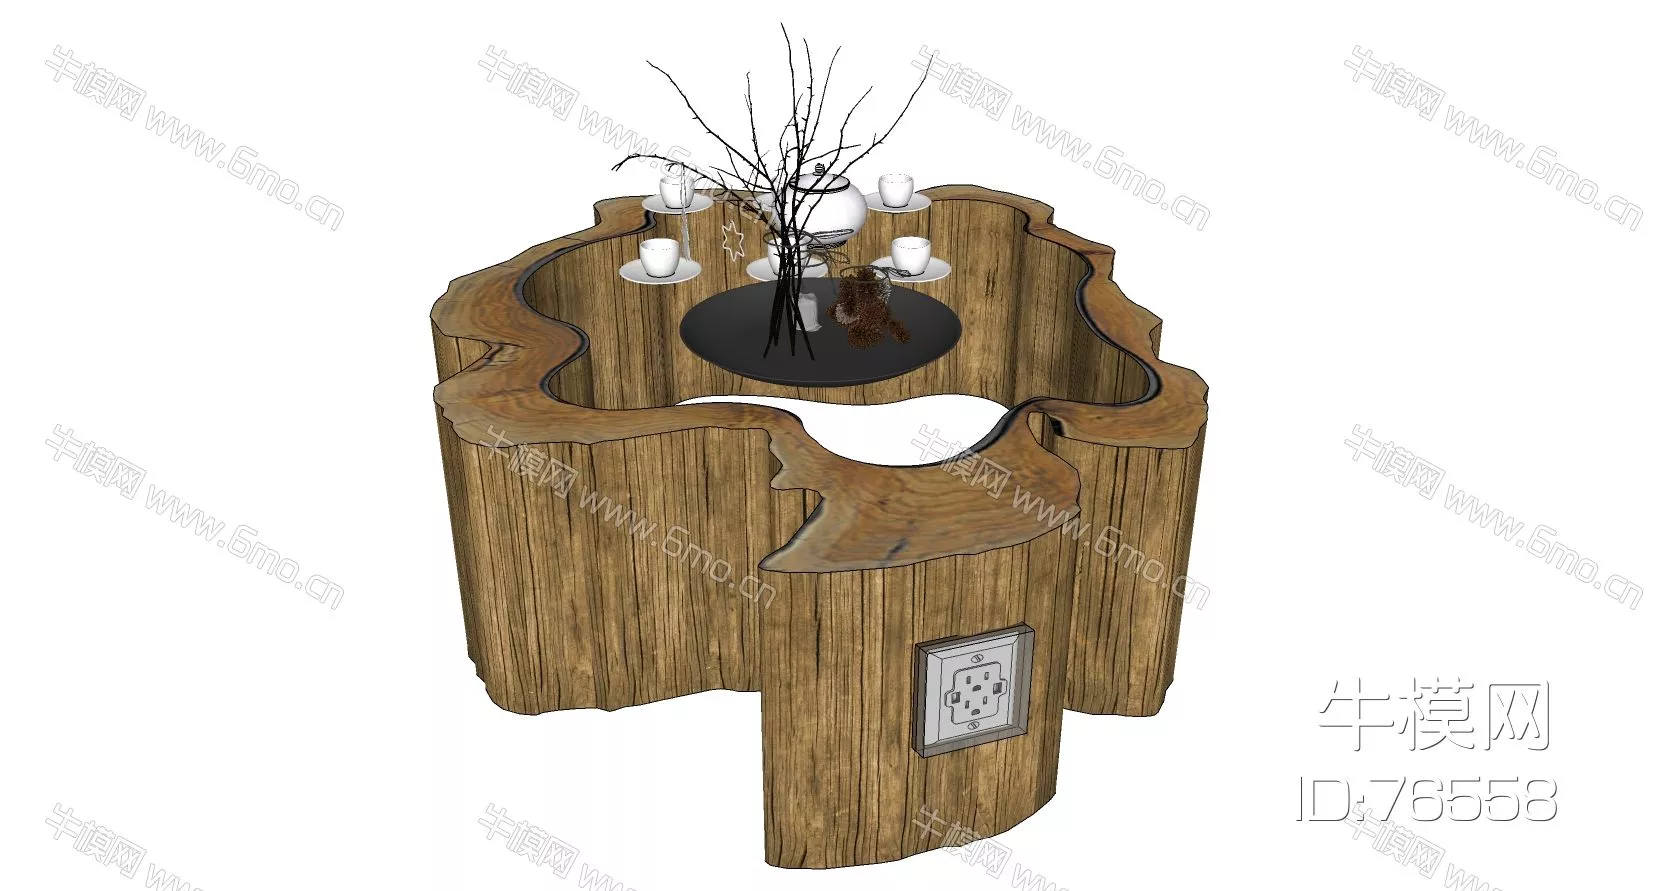 CHINESE COFFEE TABLE - SKETCHUP 3D MODEL - ENSCAPE - 76558